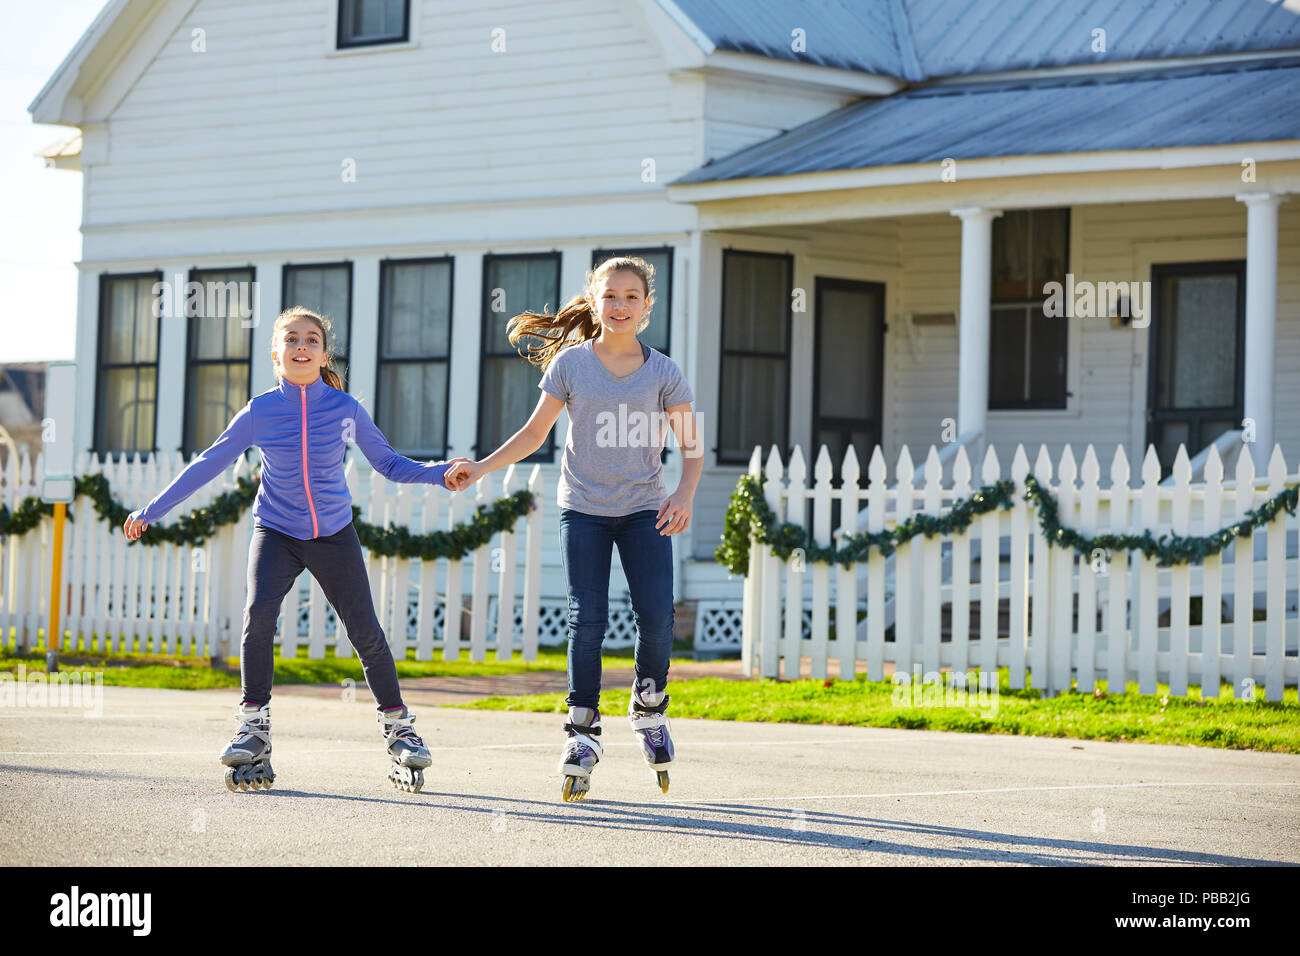 Teen girls group rolling skate in the street outdoor Stock Photo